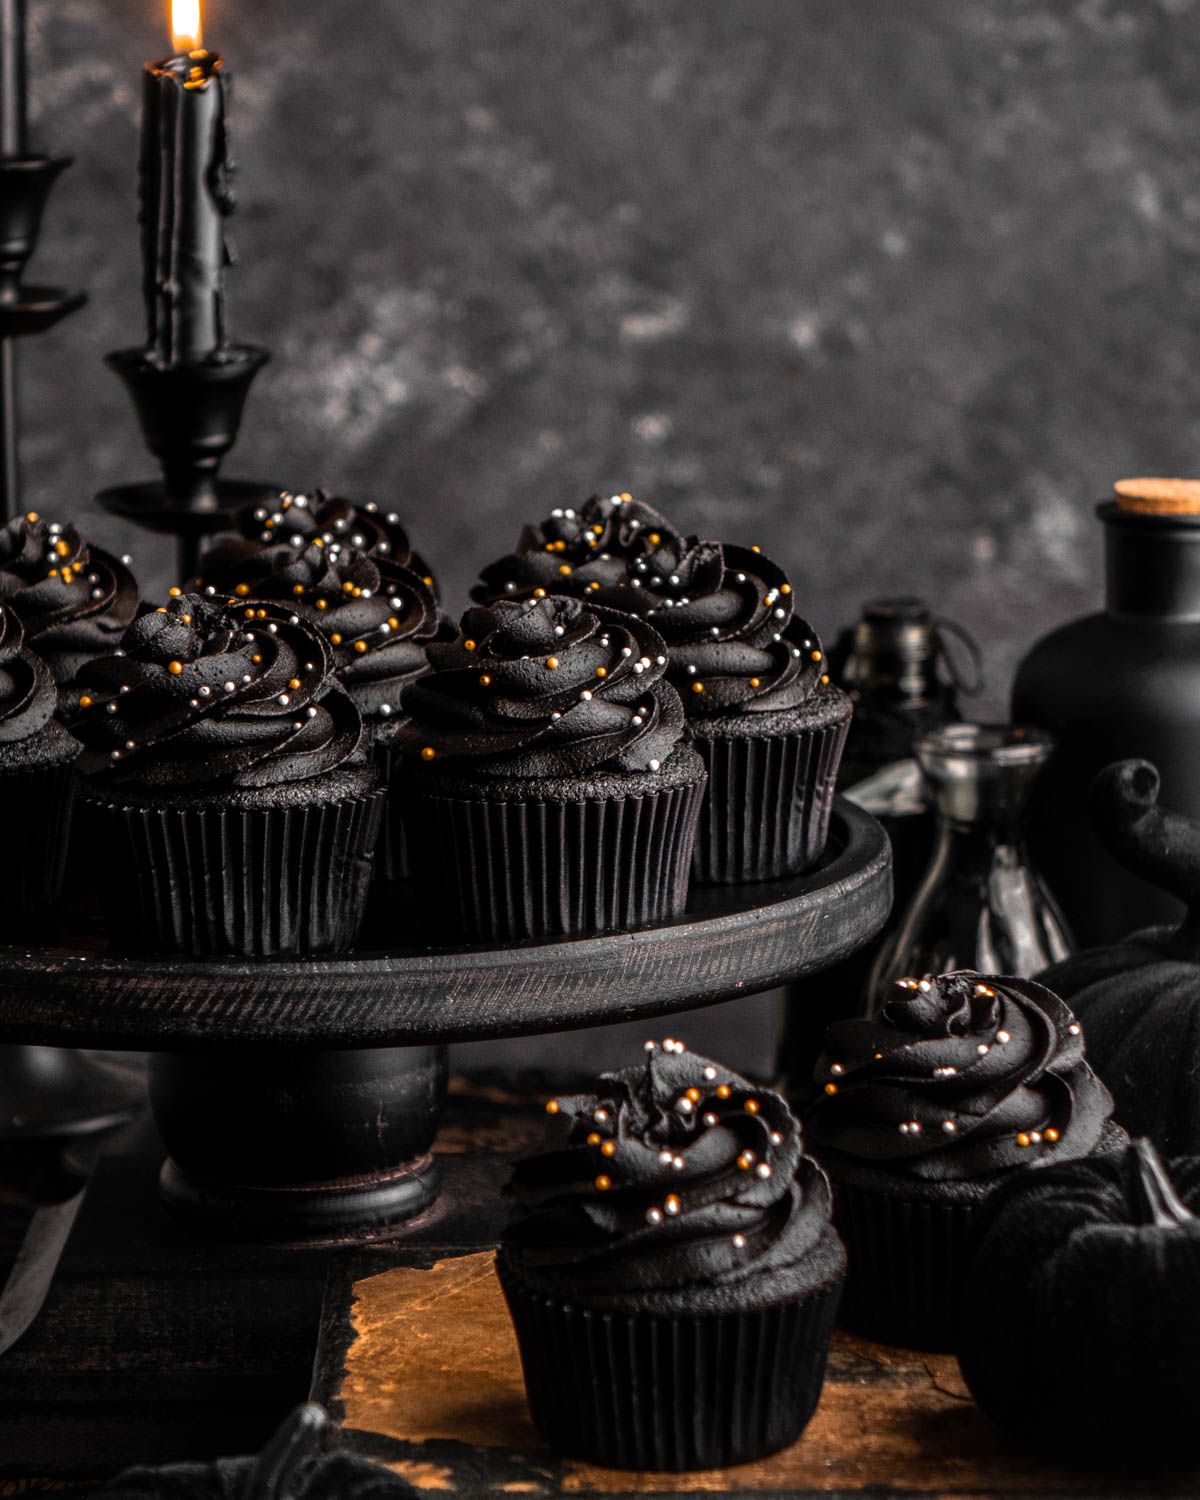 black velvet cupcakes on a black cake stand with black candles and bottles in background 